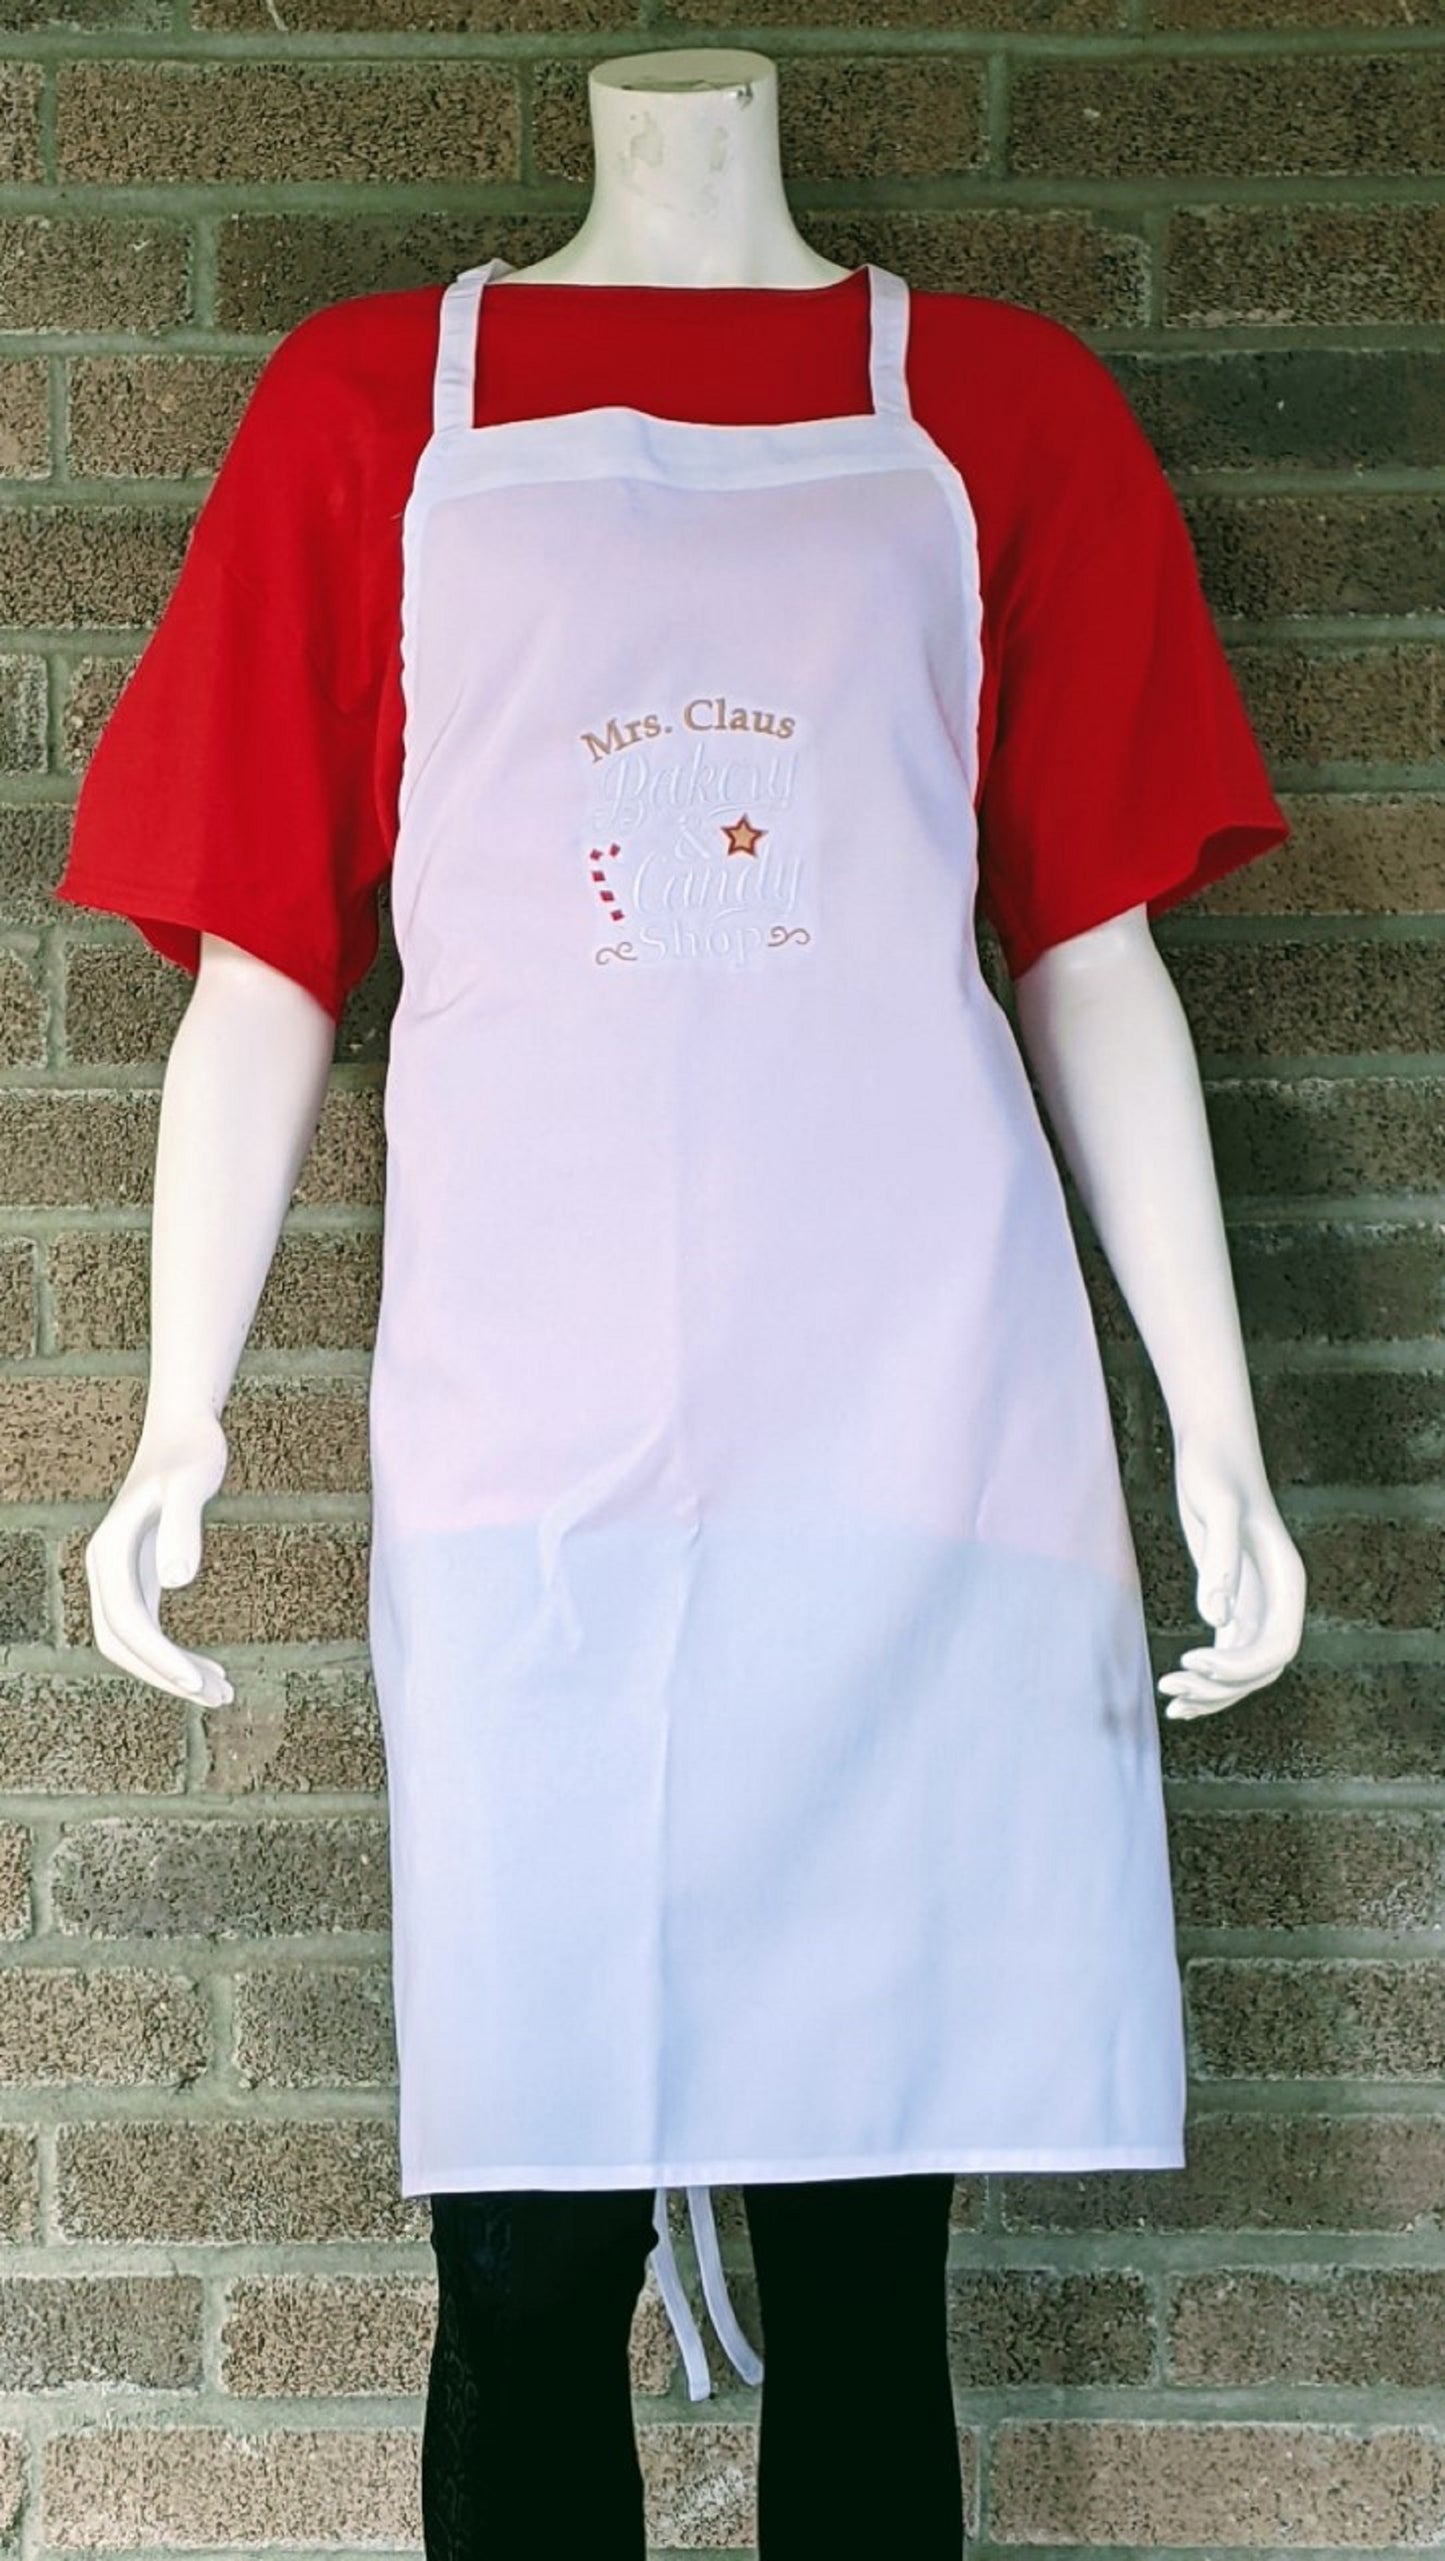 Mrs. Claus Bakery and Candy Shop Embroidered Adult Apron